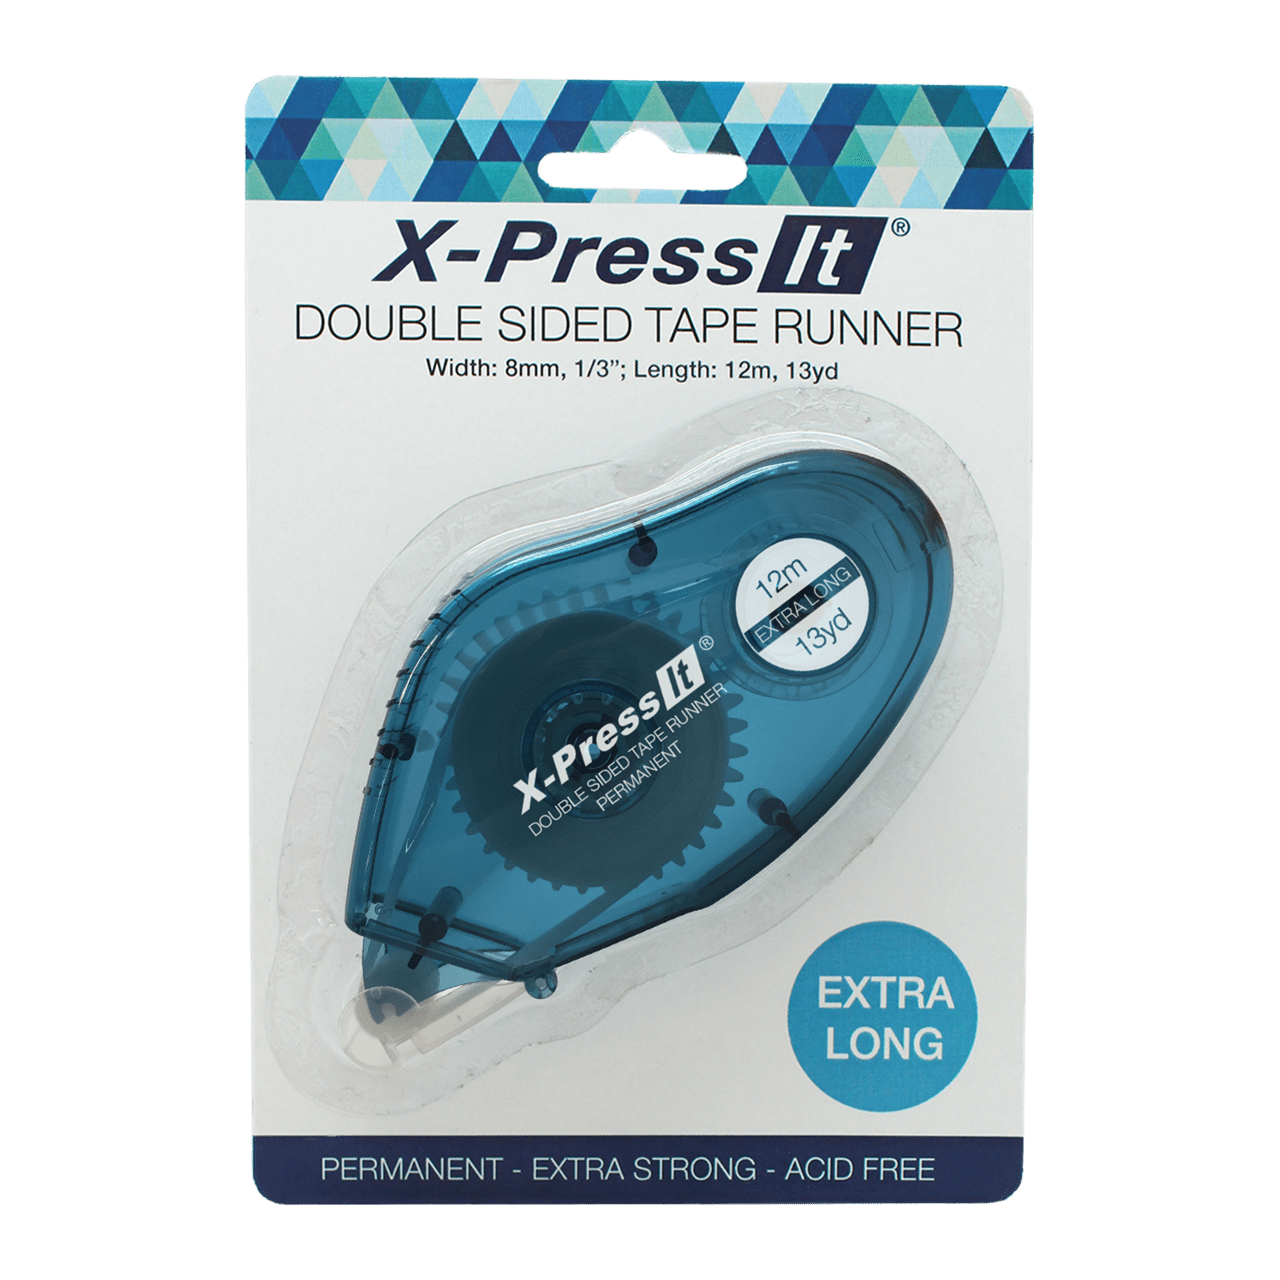 X-Press It Double Sided Tape Runner 8mm x 12m Permanent